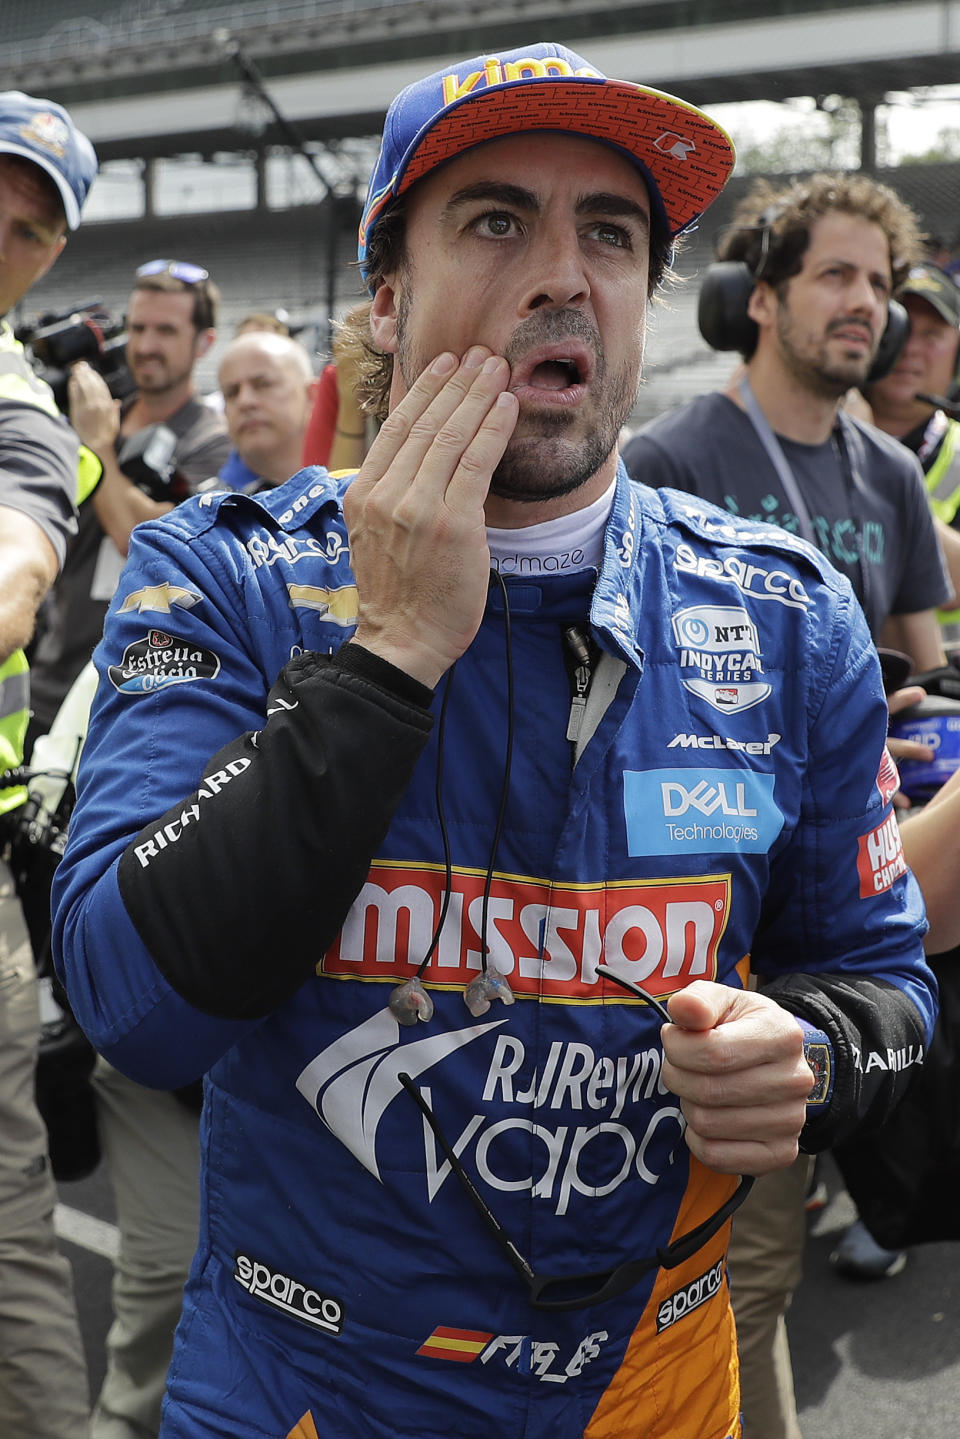 Fernando Alonso, of Spain, looks at his posted speed after his qualification attemp for the Indianapolis 500 IndyCar auto race at Indianapolis Motor Speedway, Sunday, May 19, 2019 in Indianapolis. Alonso failed to make th field. (AP Photo/Darron Cummings)